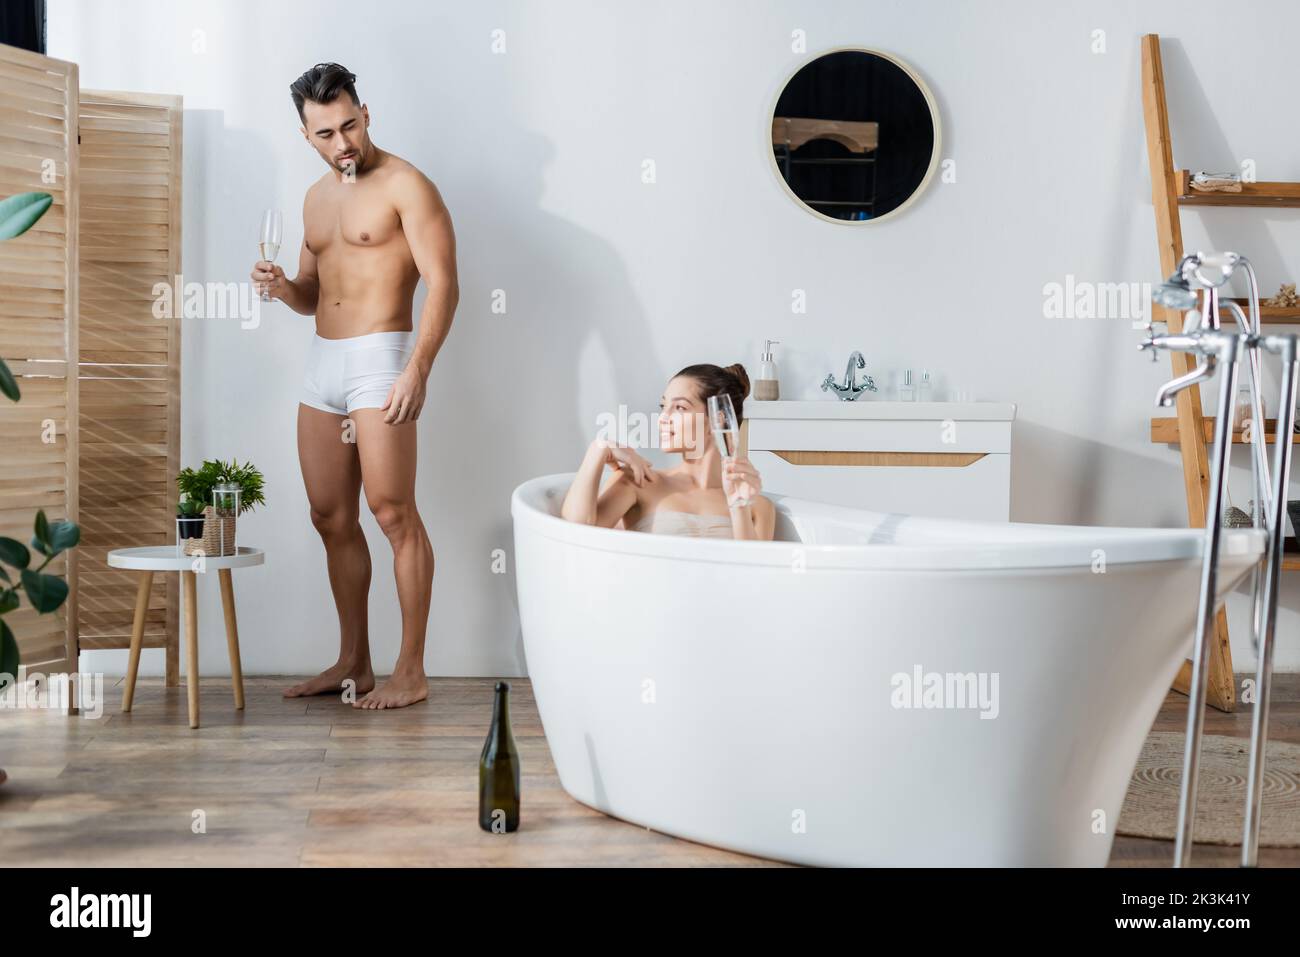 smiling woman relaxing in bathtub near boyfriend in underpants standing with champagne glass Stock Photo